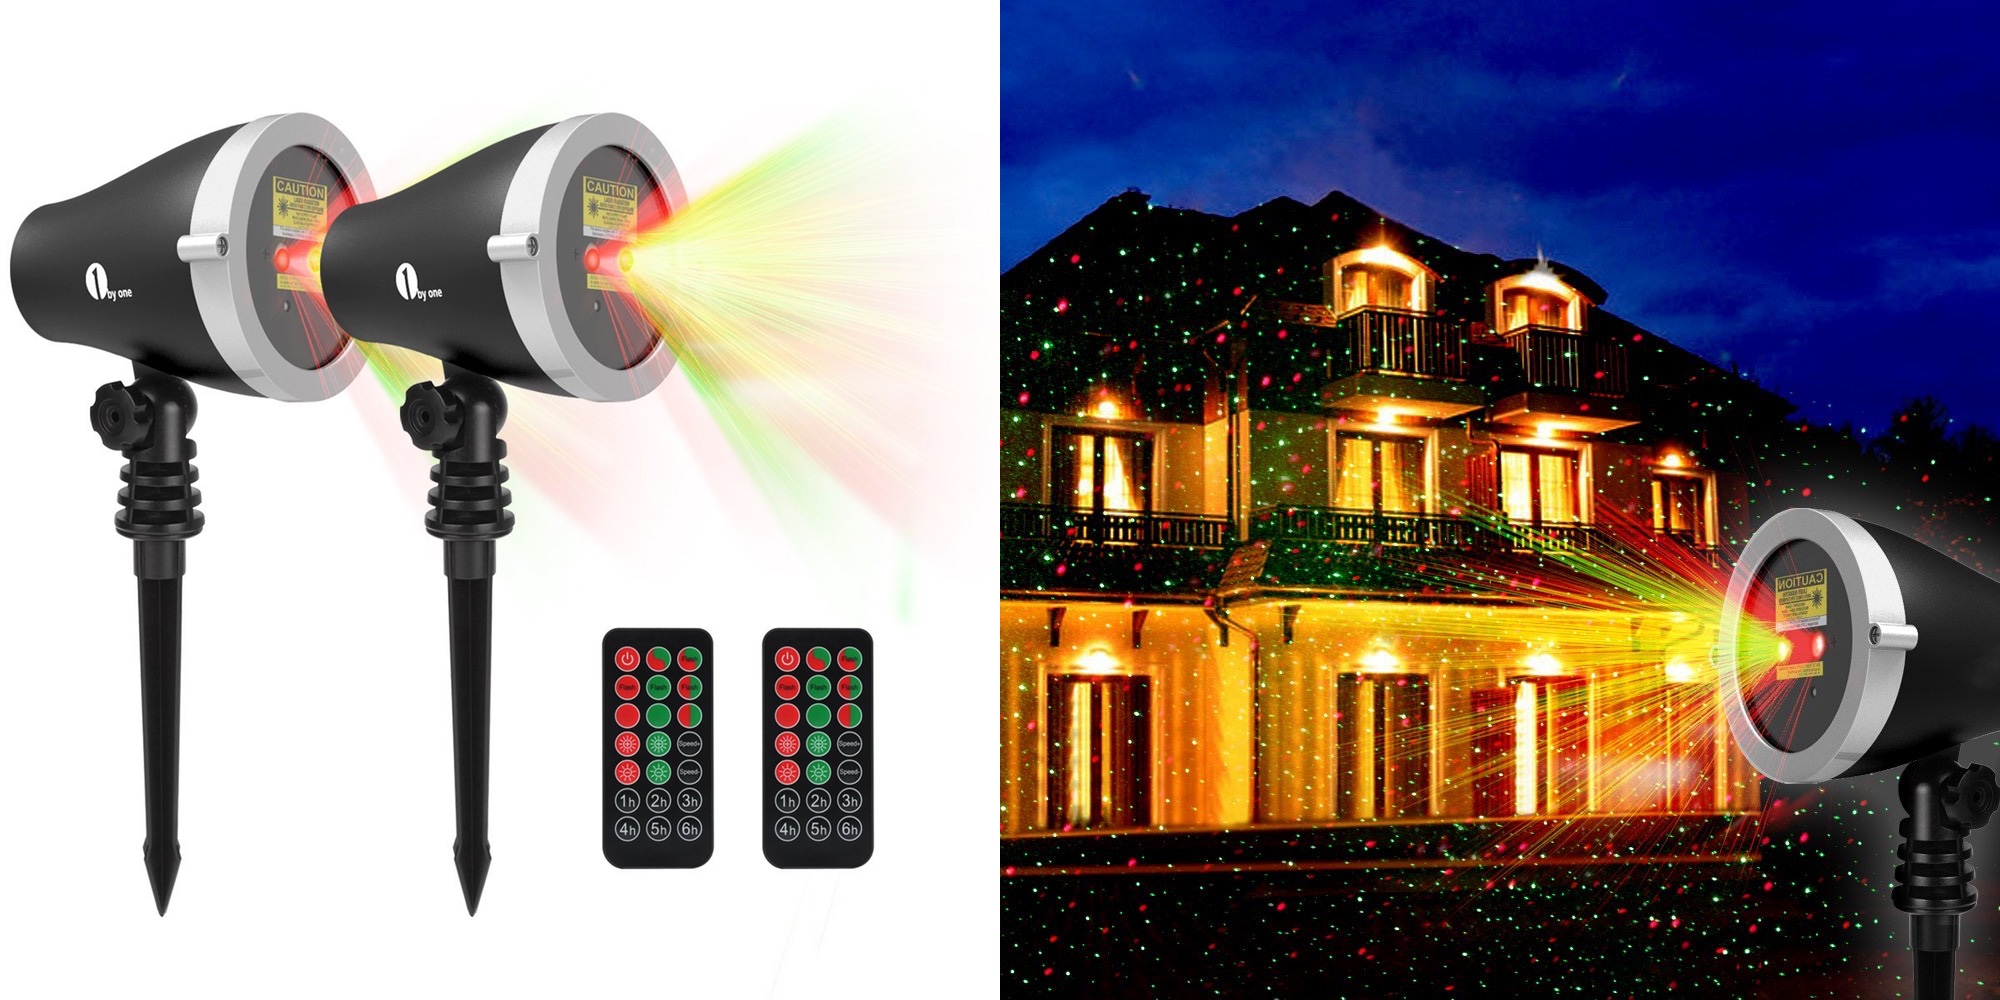 https://9to5toys.com/wp-content/uploads/sites/5/2017/12/1byone-christmas-outdoor-laser-light-projector.jpg